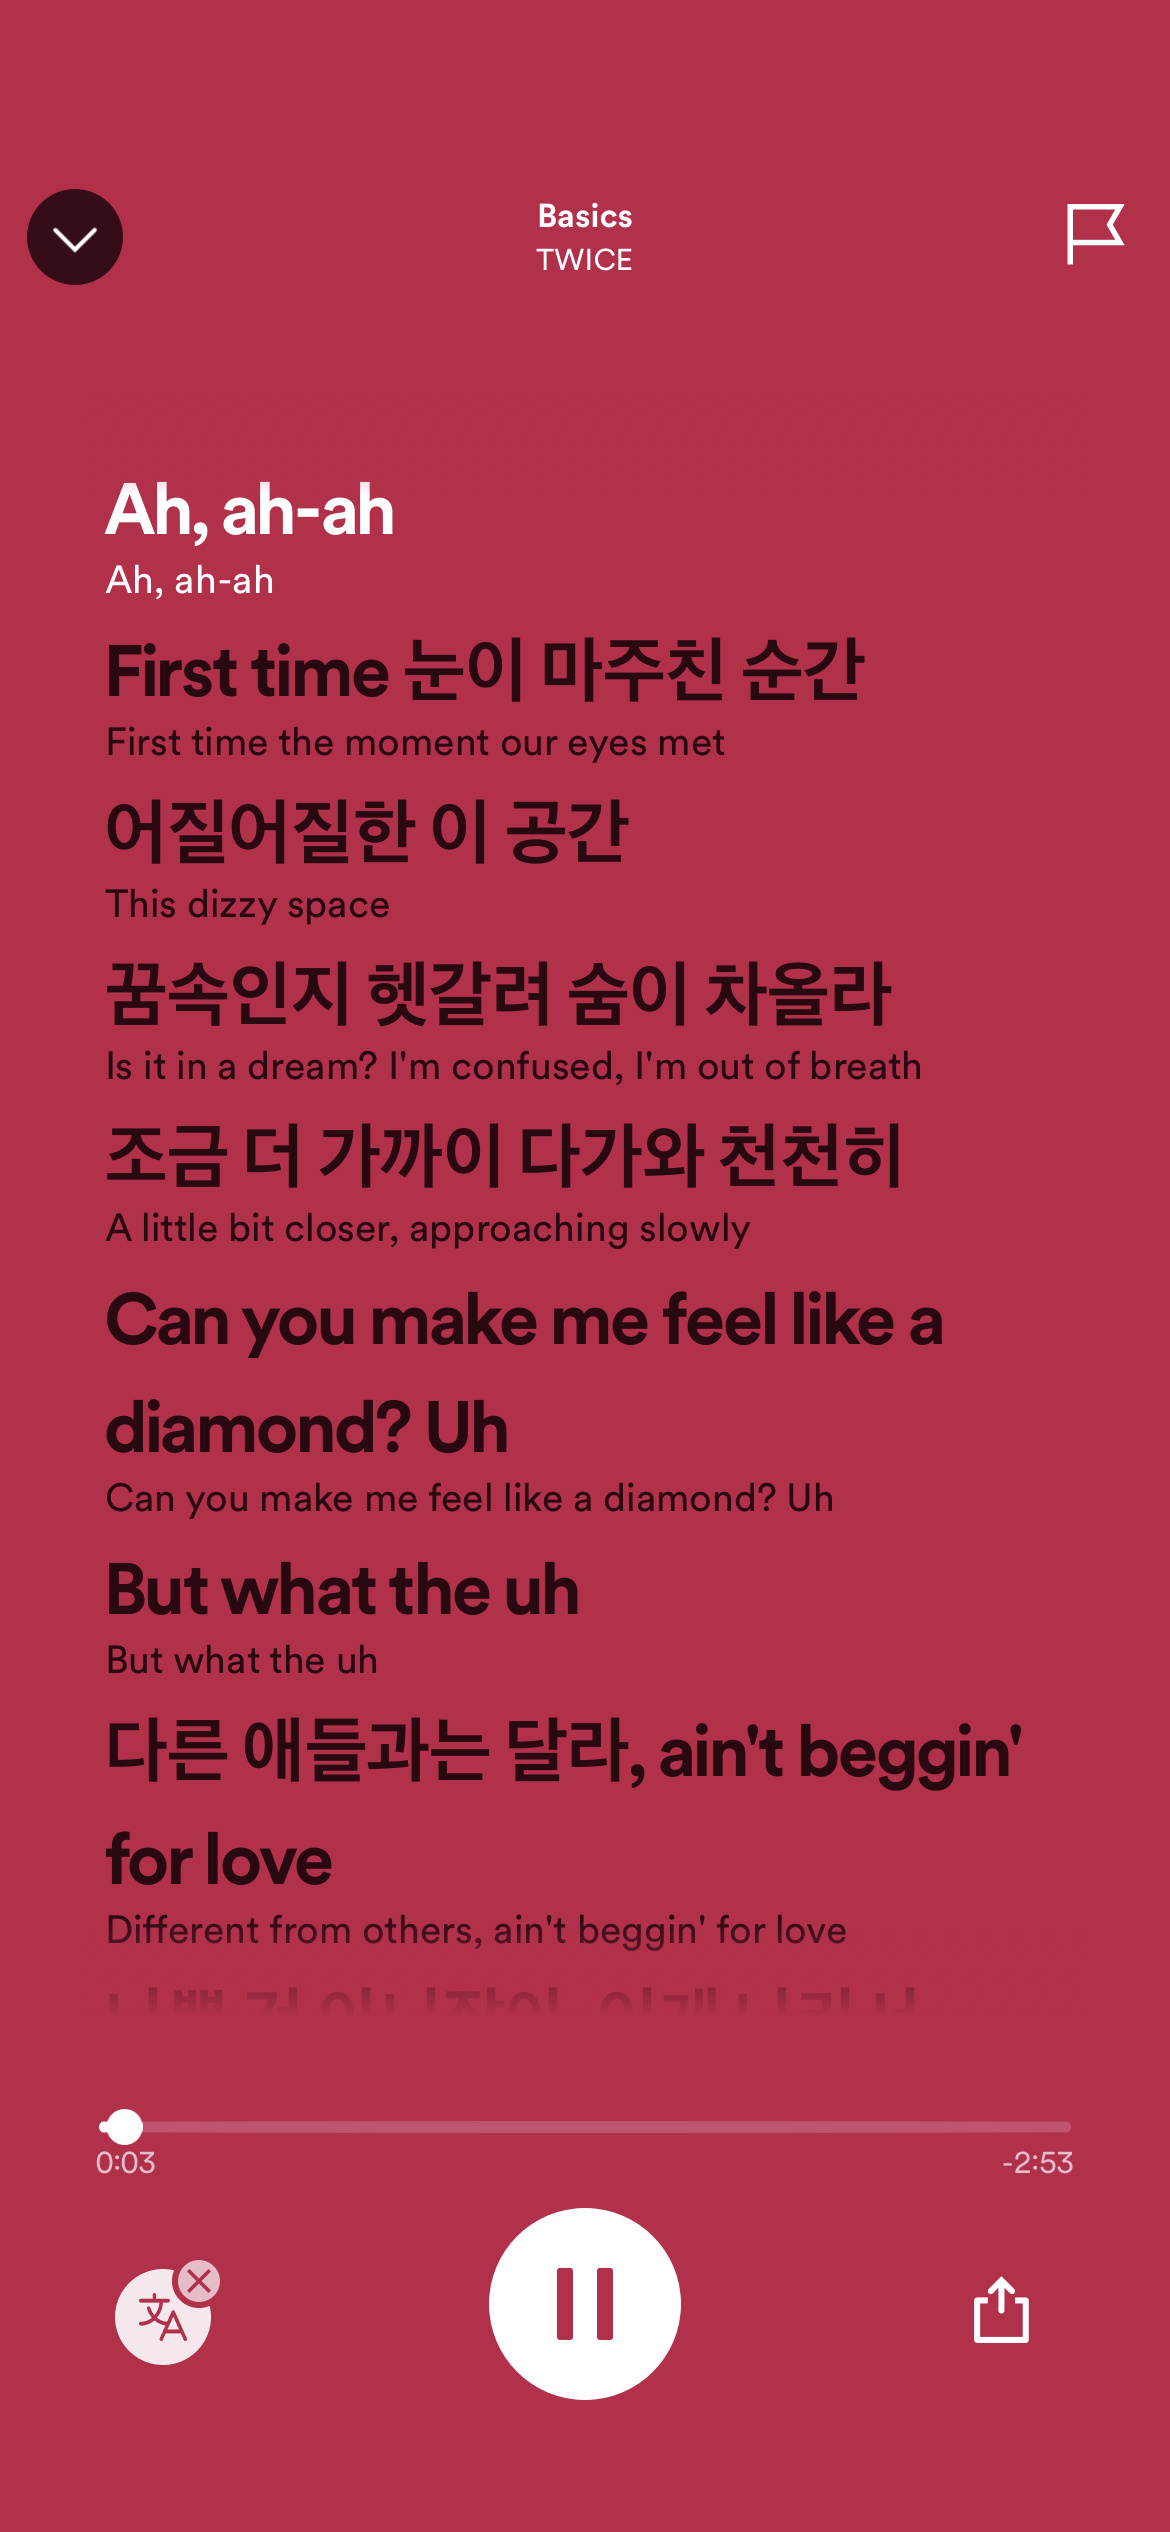 All Platforms][Other] Romanized Lyrics for Songs ... - The Spotify Community